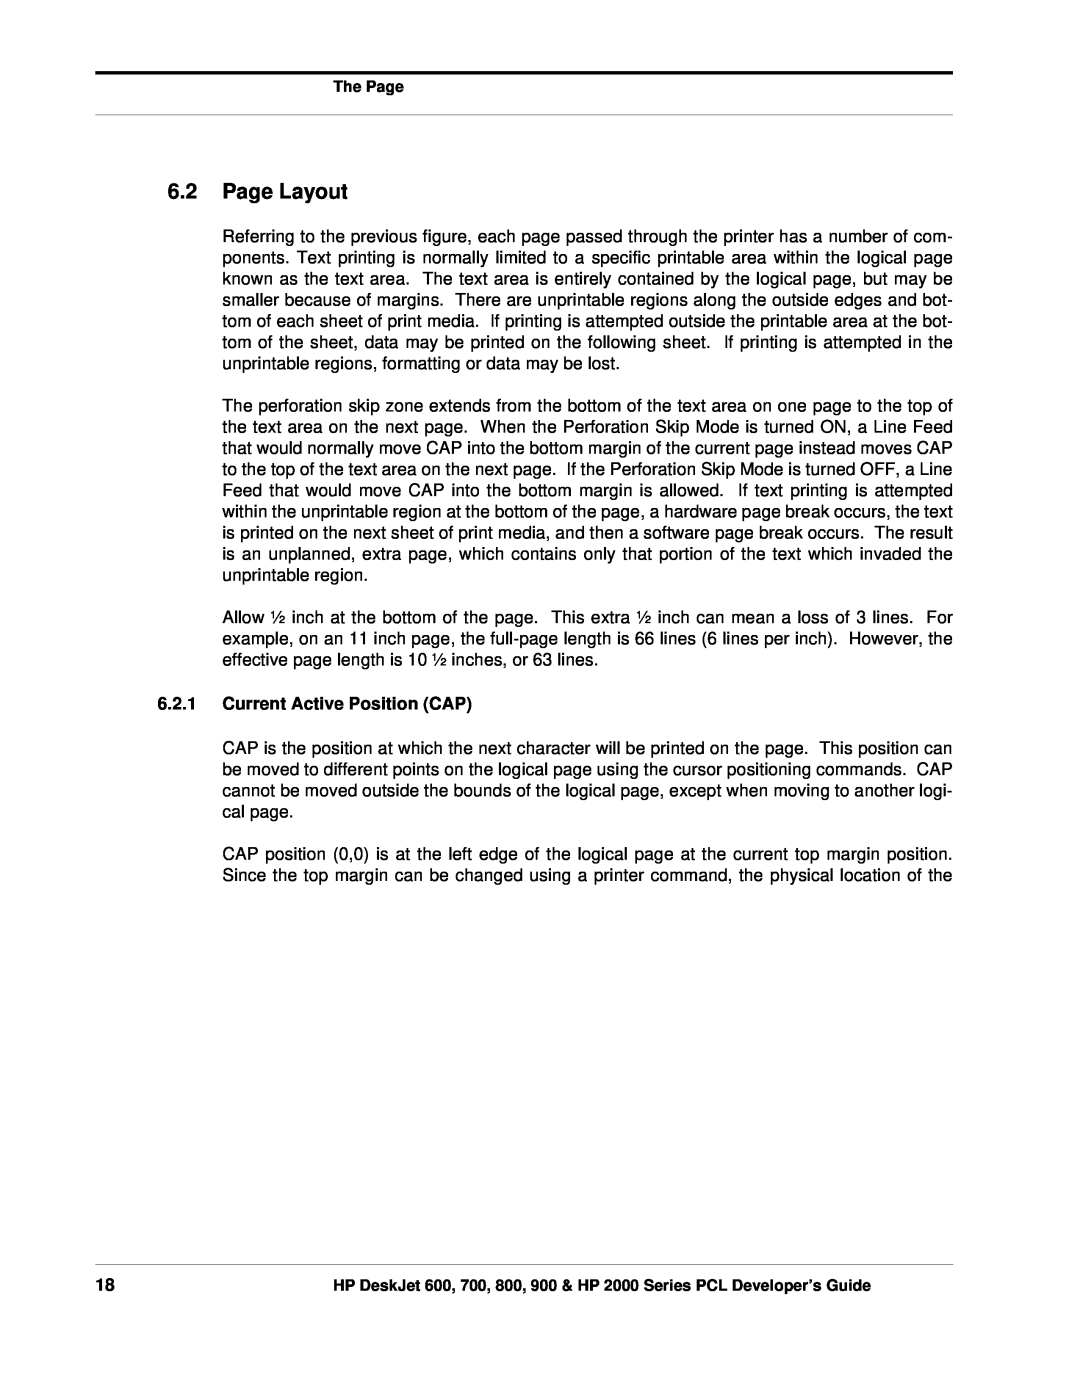 HP 800, 700 manual Page Layout, Current Active Position CAP 